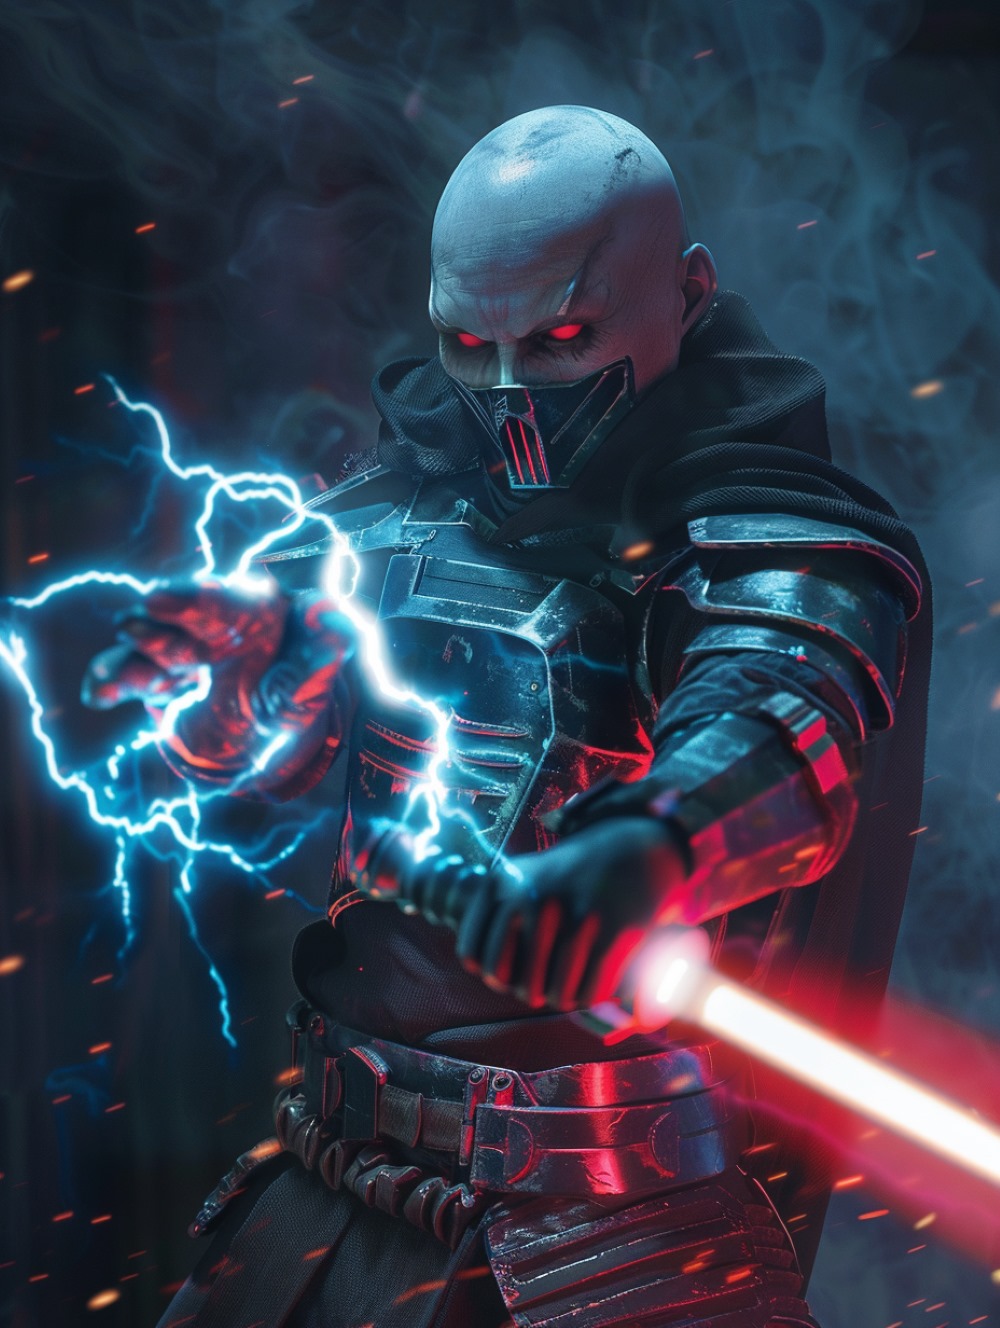 Darth Malgus is releasing Force Lightning with his hand